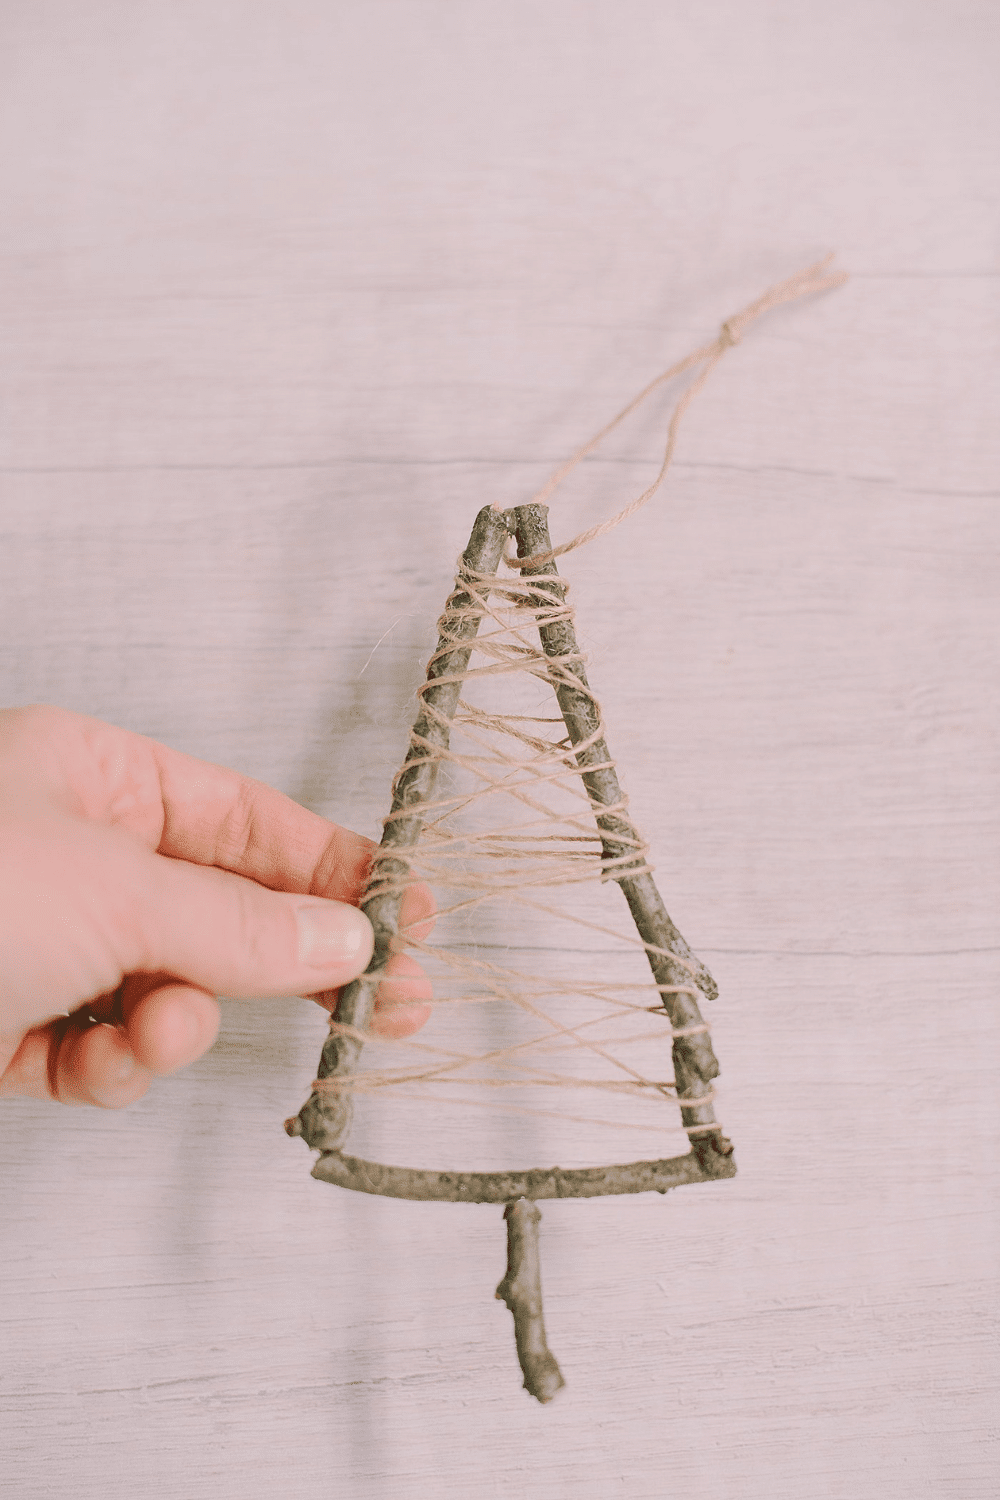 How to Make a Twine-Wrapped Stick Tree Ornament